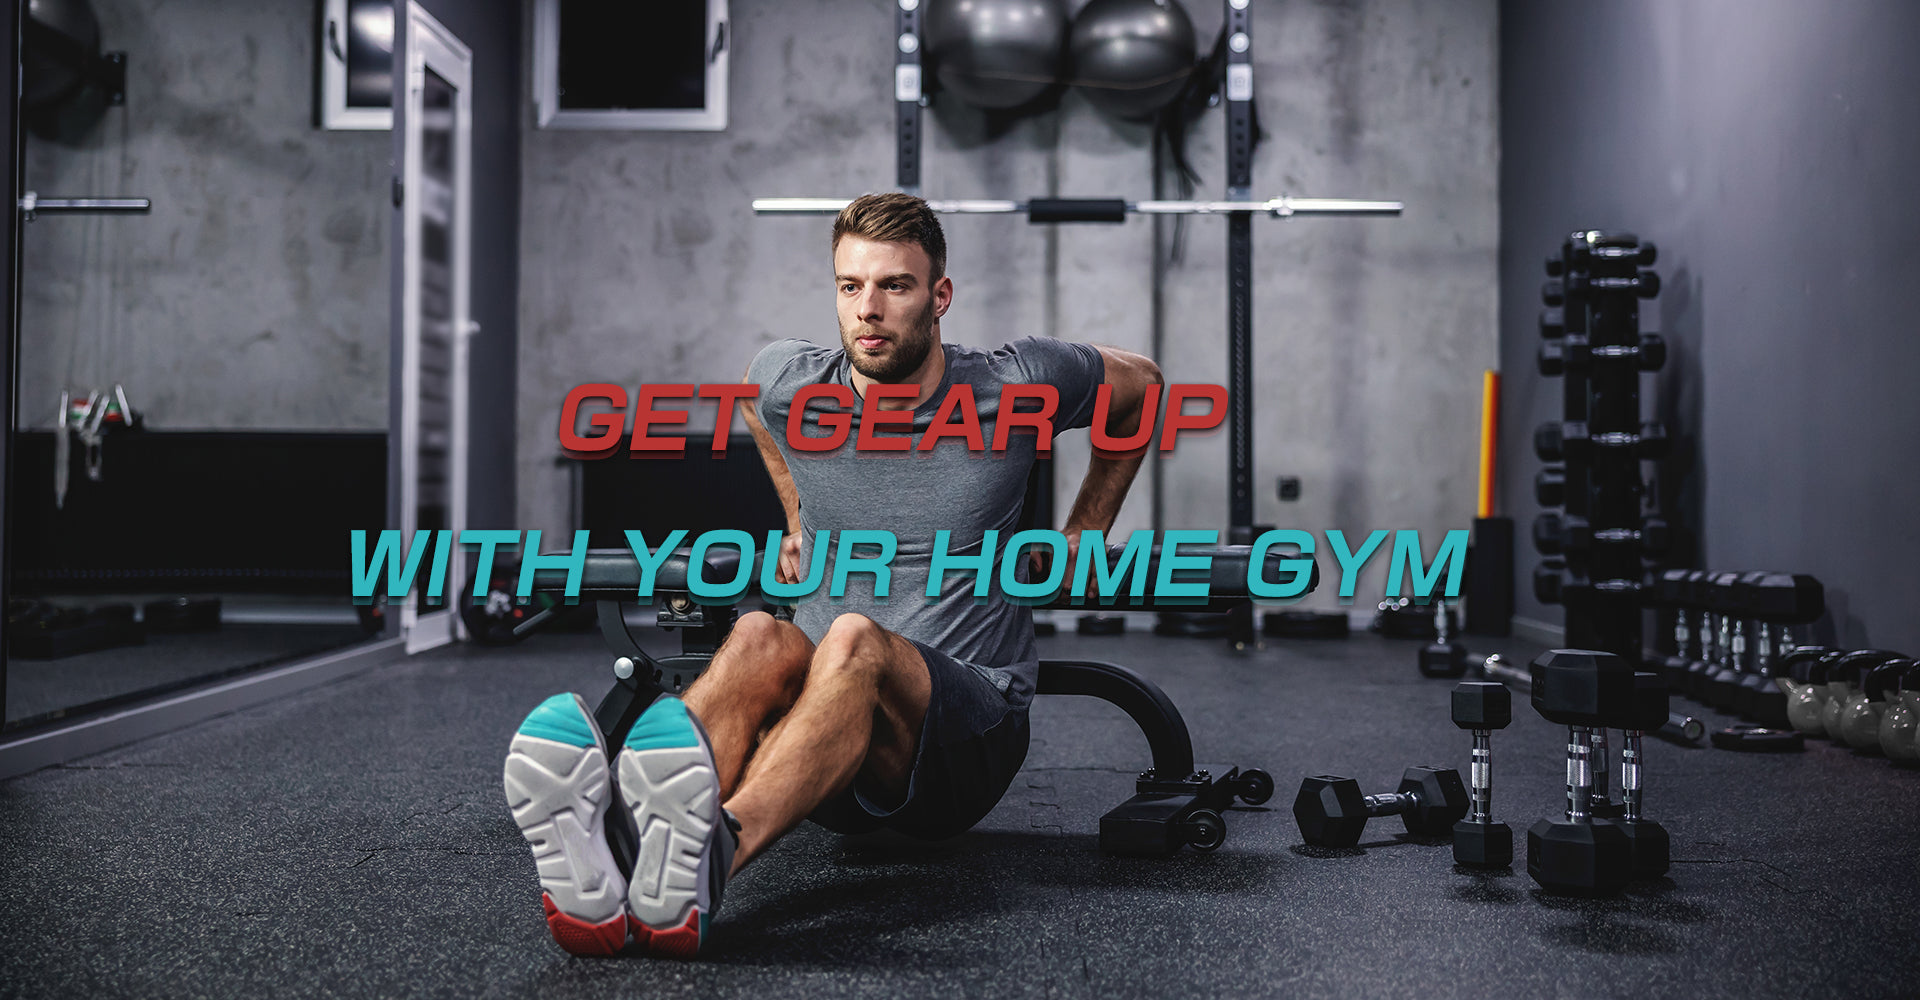 New Release! Get Gear Up With Your Home Gym